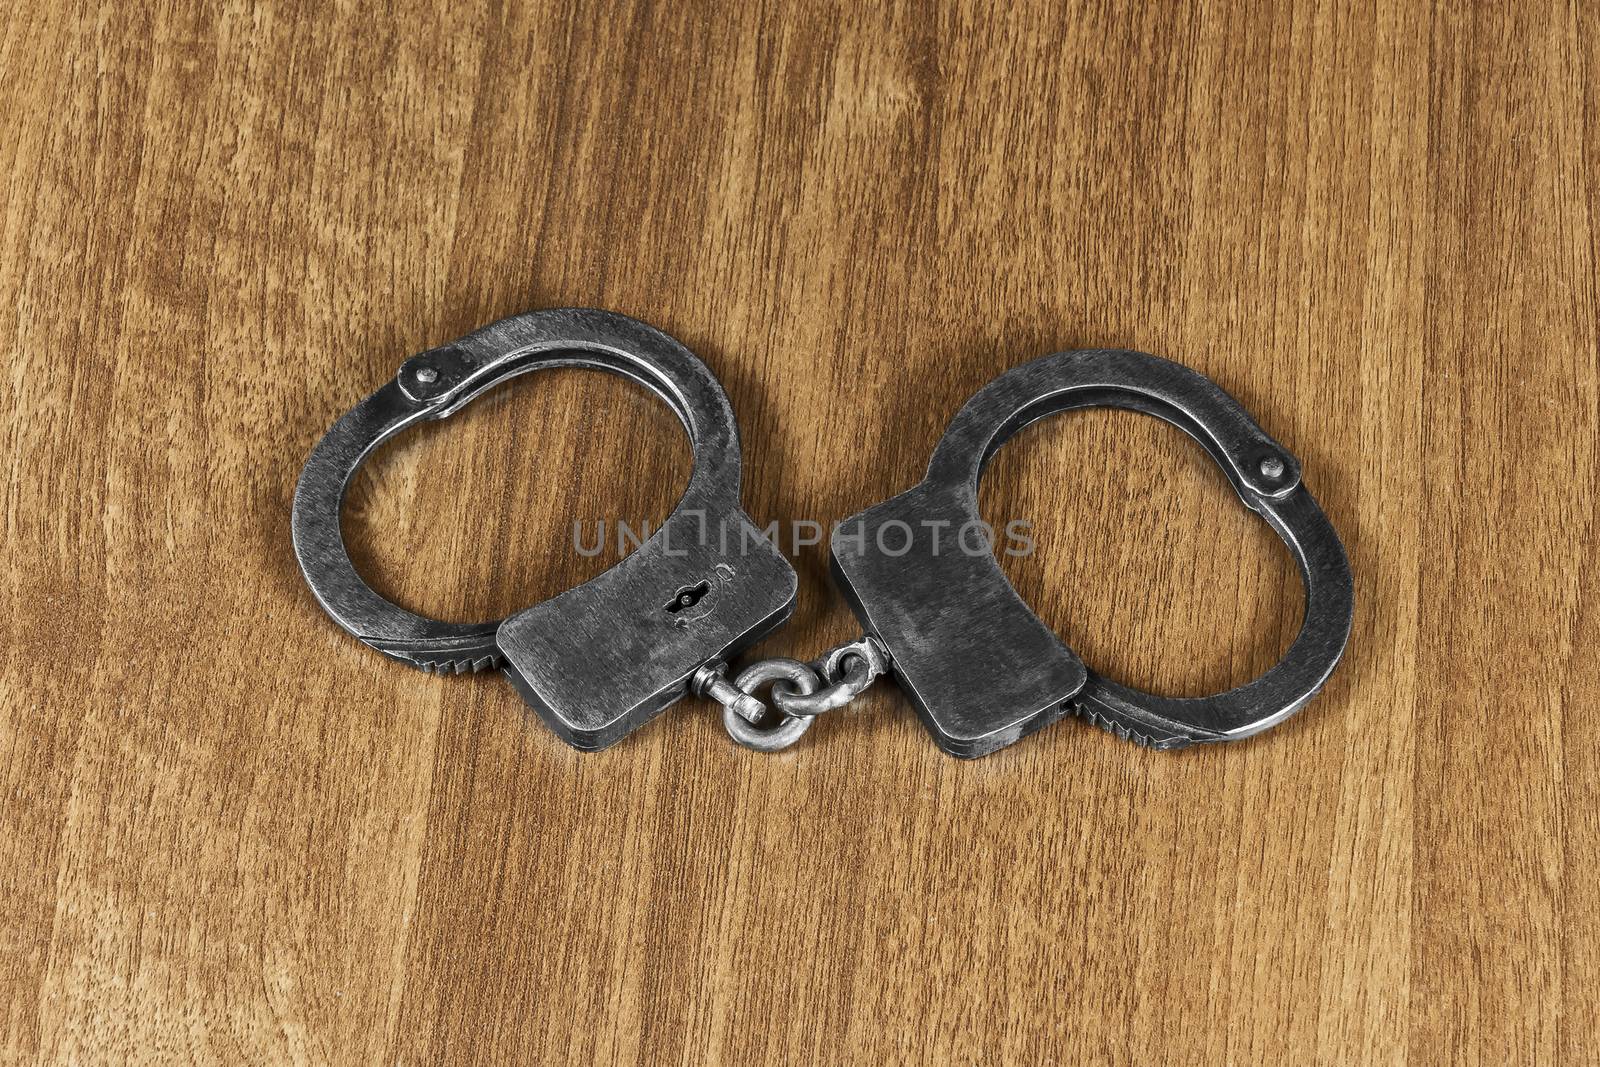 Police handcuffs lie on a wooden table